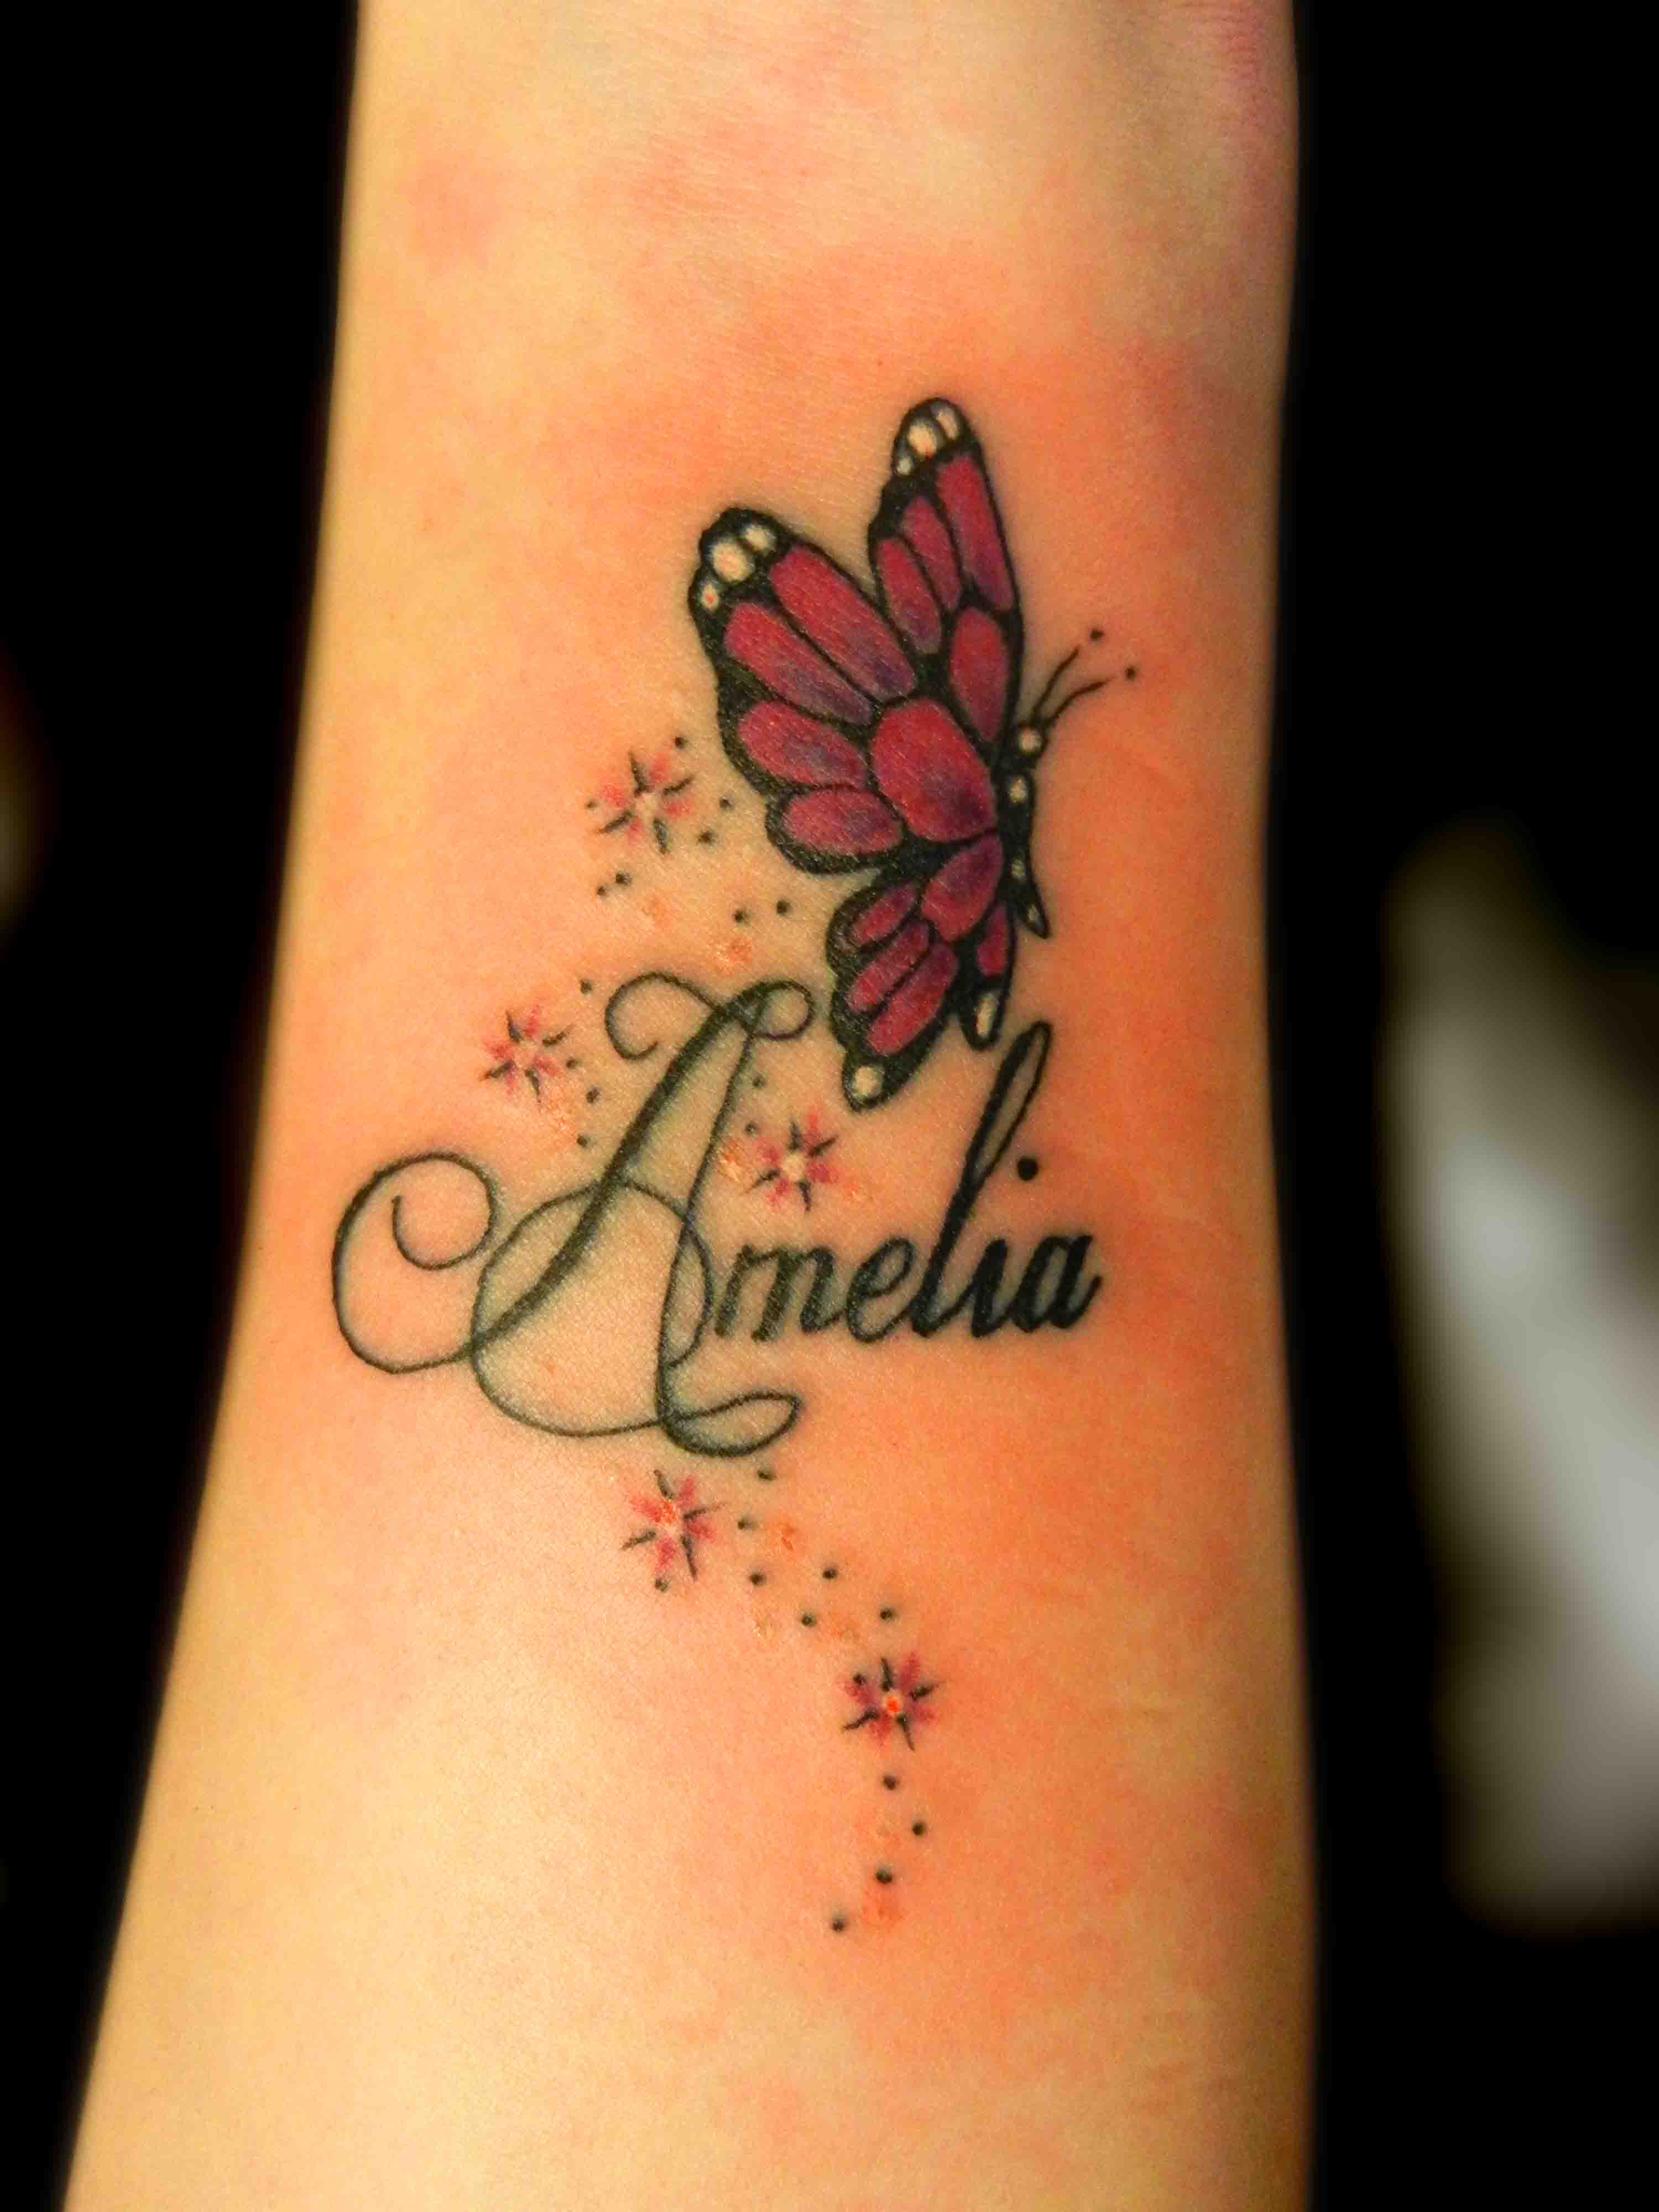 Butterfly Wrist Tattoos with Names